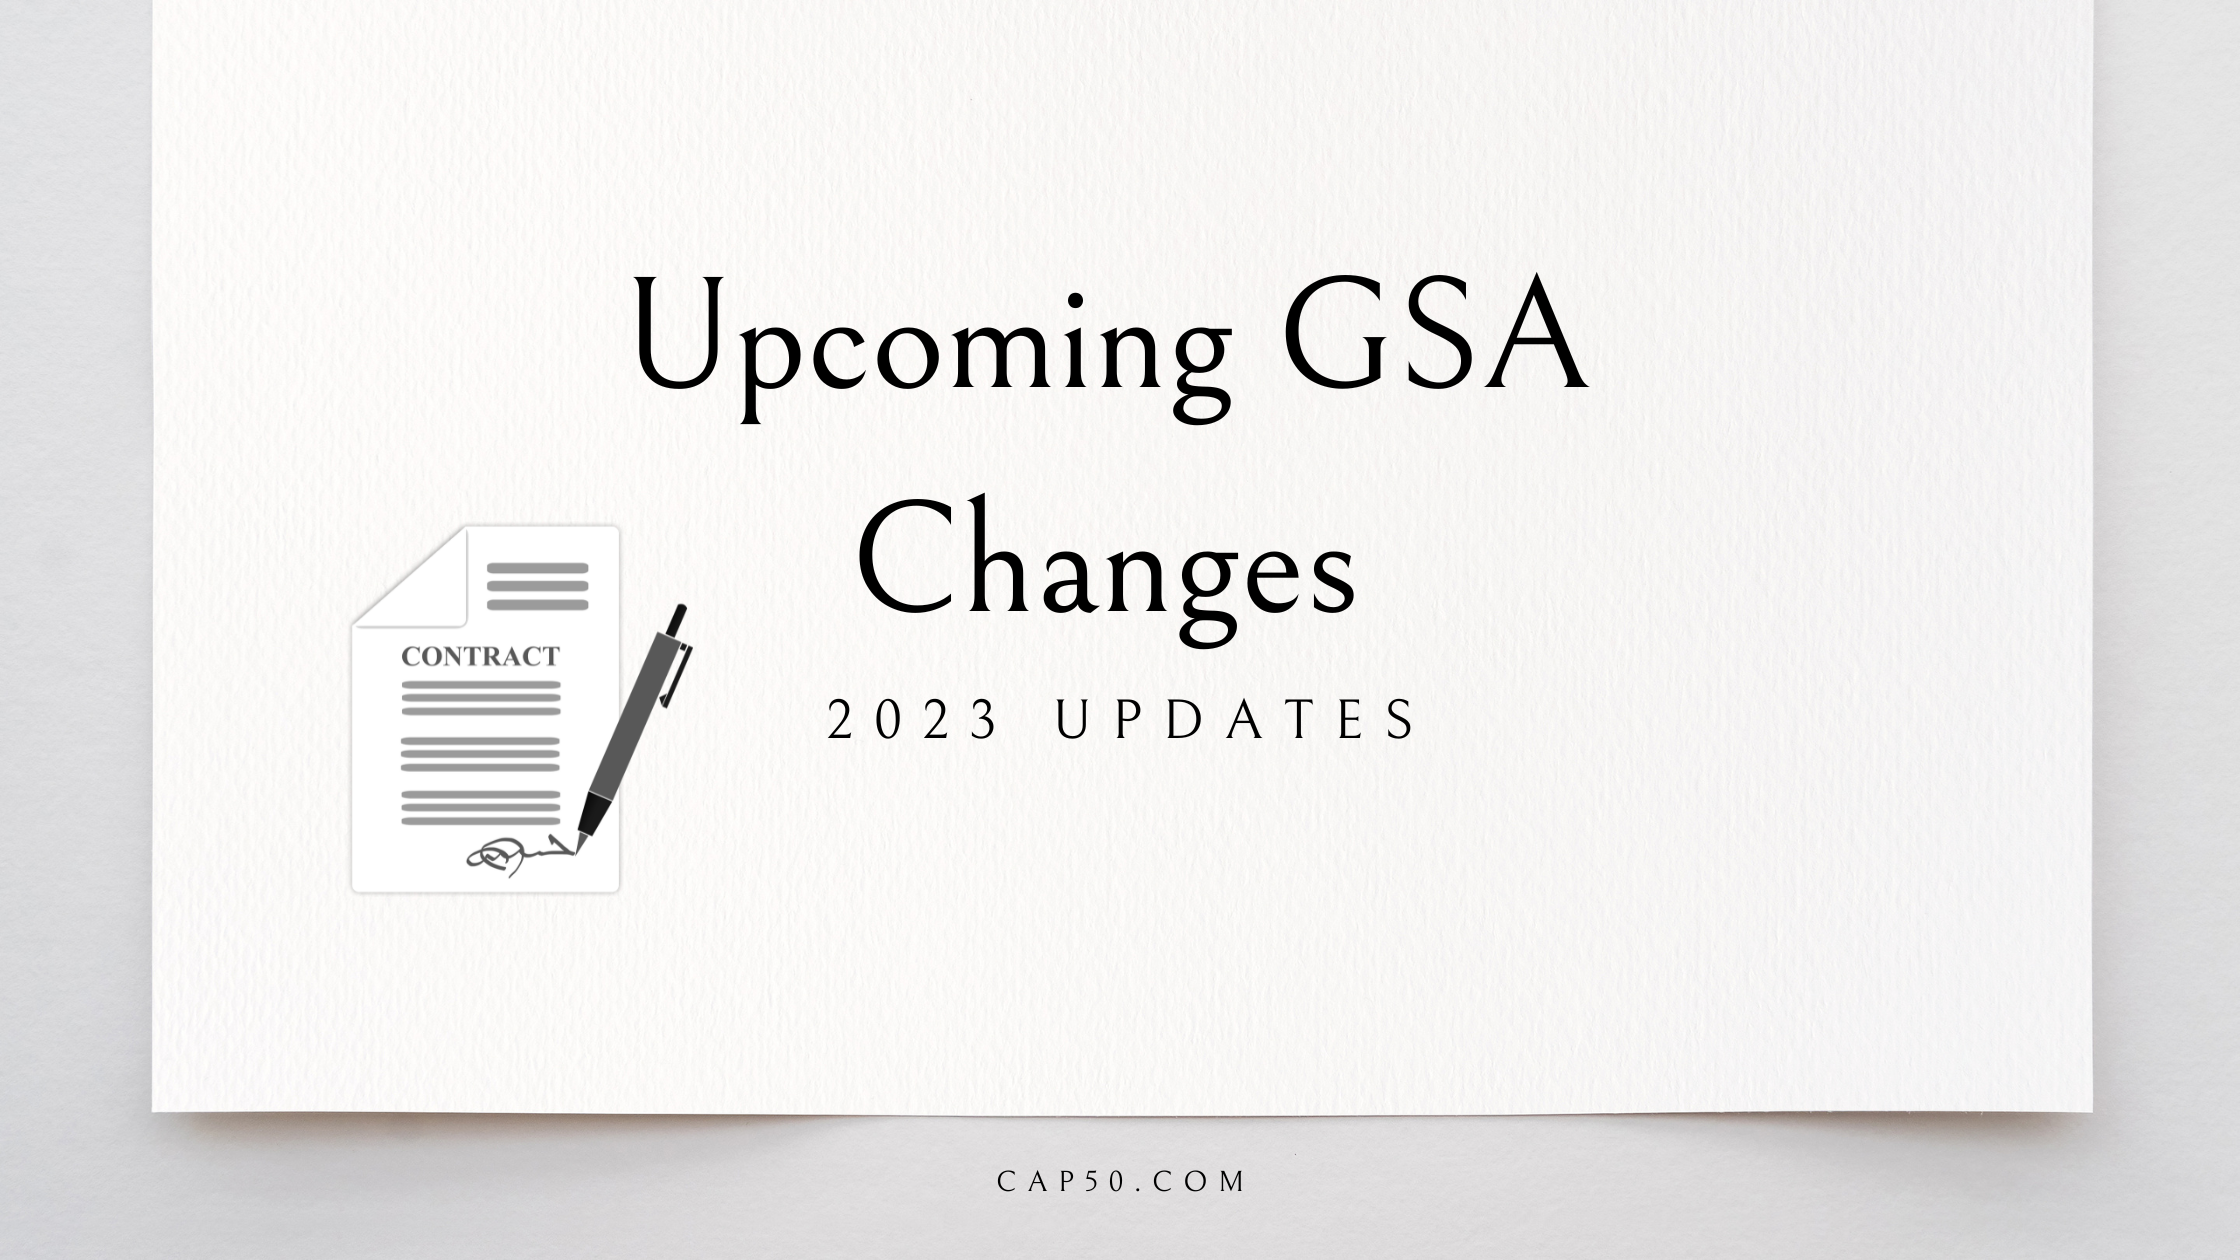 GSA is making changes for easier contracting in FY 2023